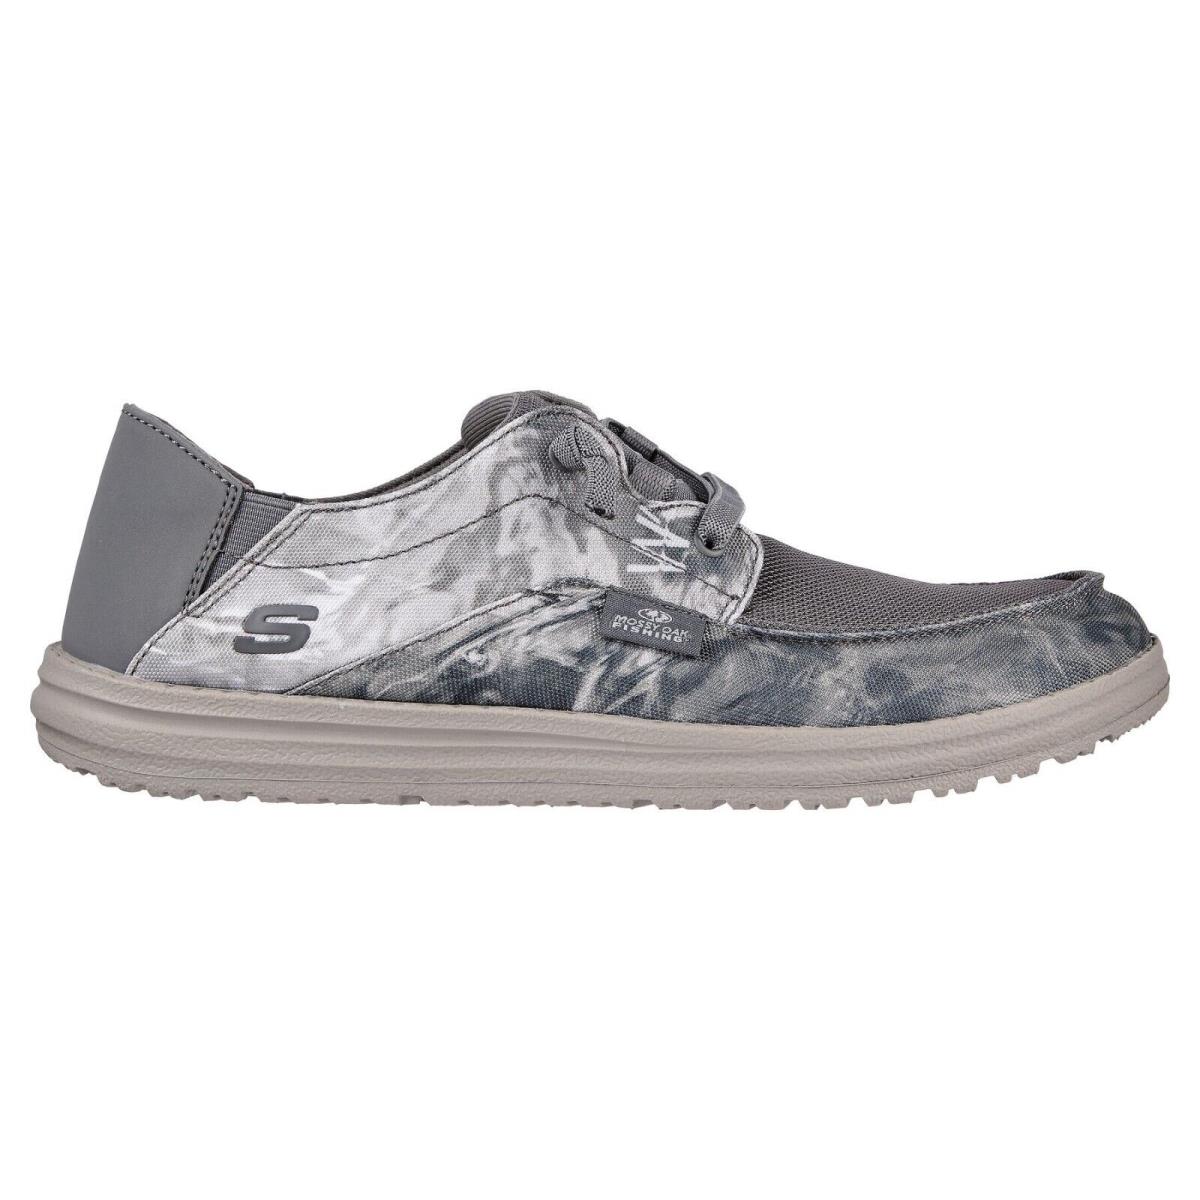 Skechers shoes Melson Topher - Gray 3